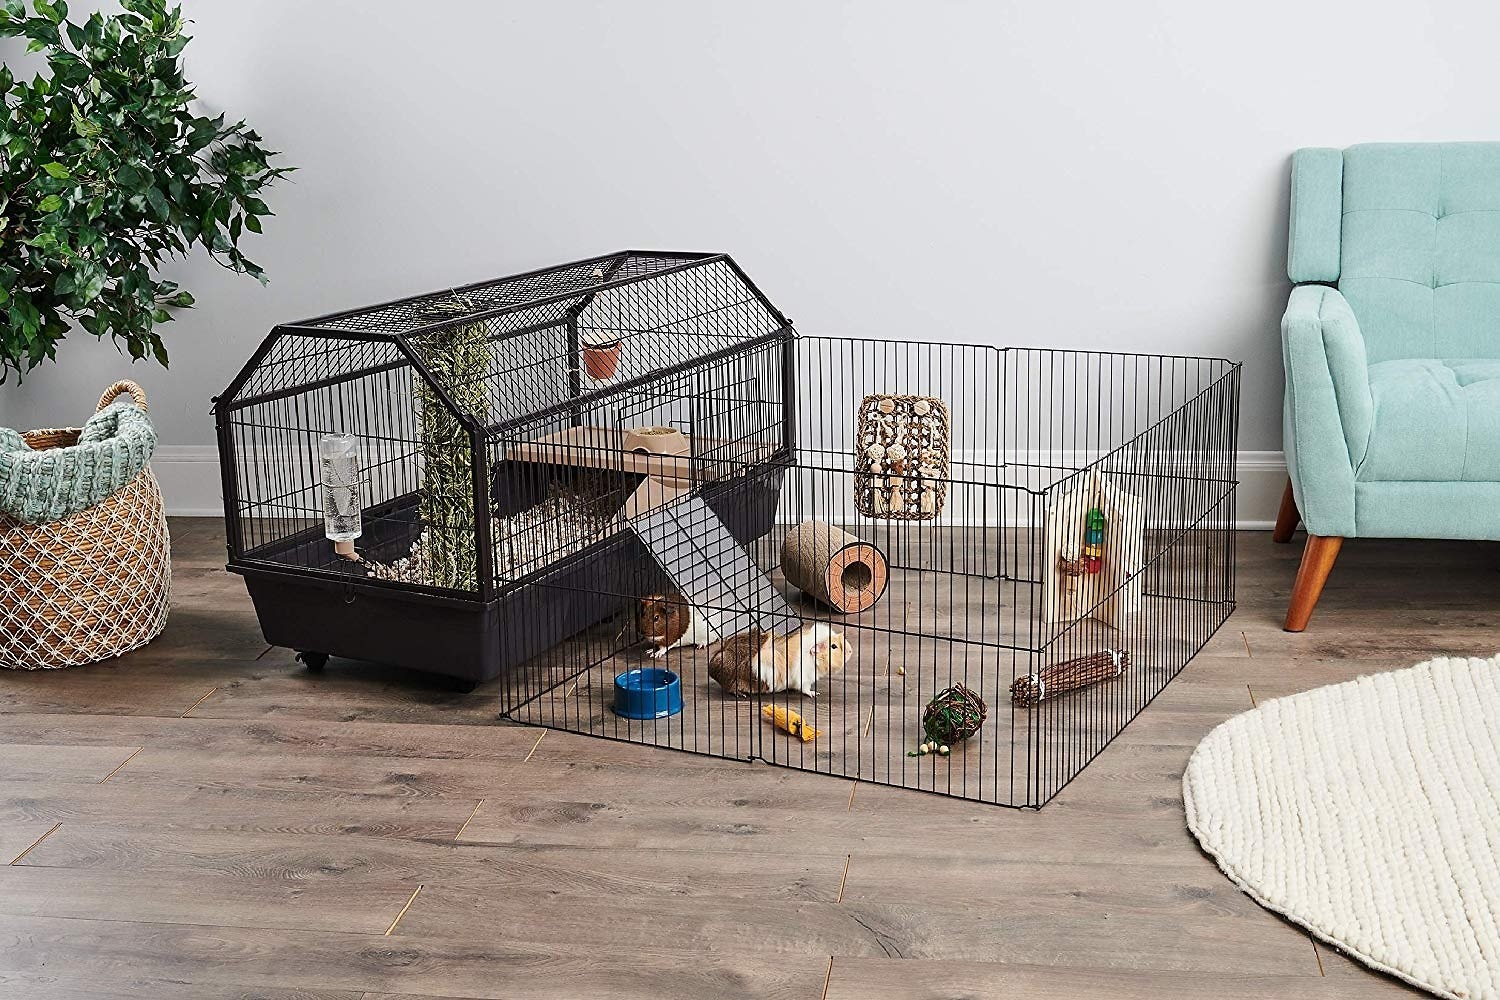 The cage with a play pen attached and a hamster inside